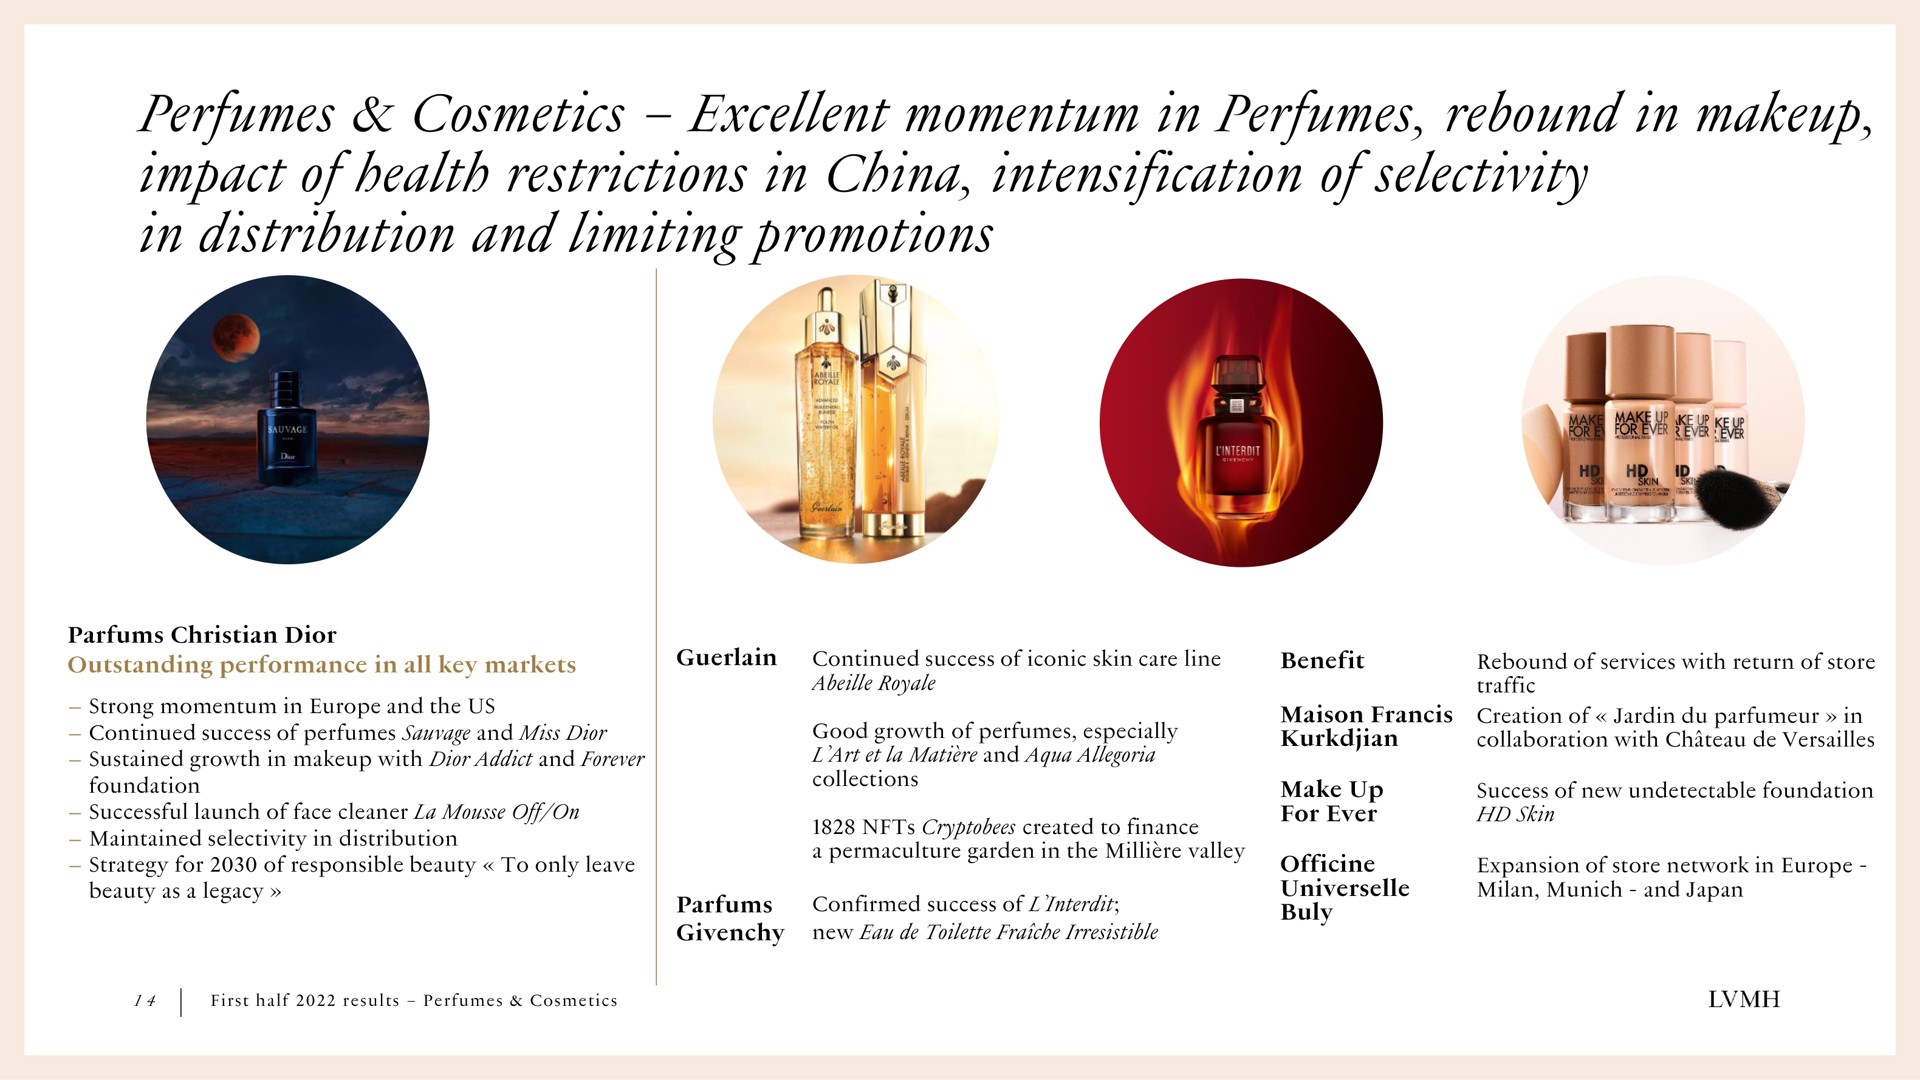 perfumes cosmetics excellent momentum in perfumes rebound in impact of health restrictions in china intensification of selectivity in distribution and limiting promotions | LVMH